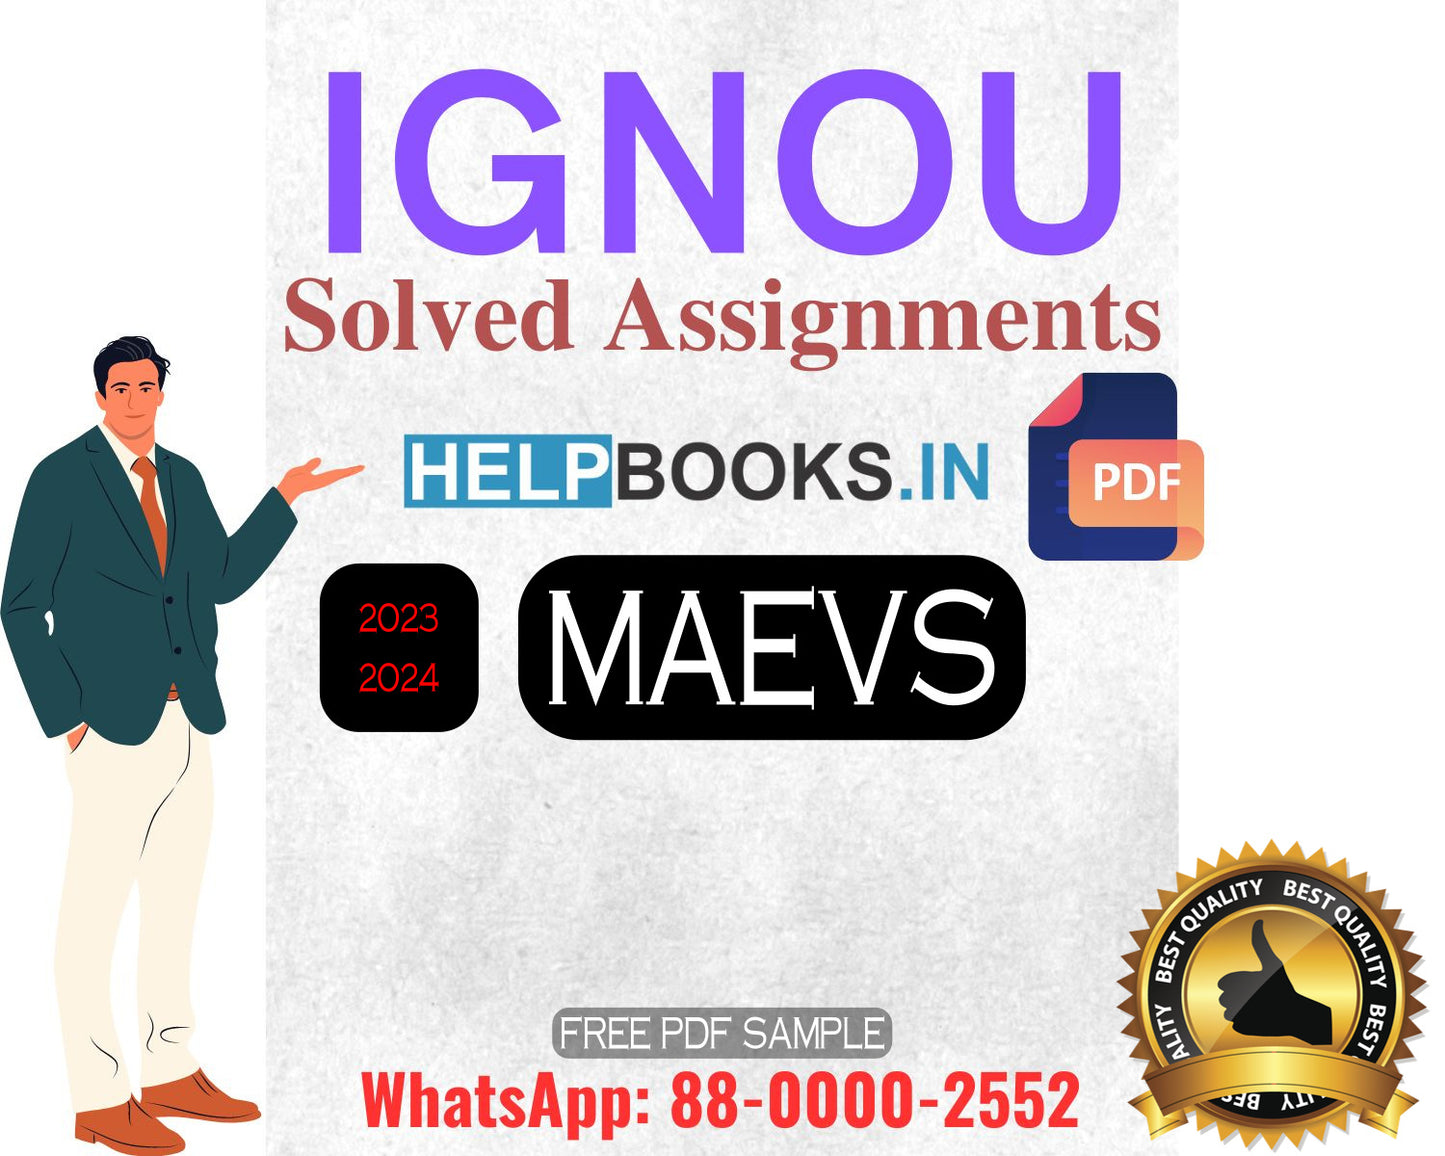 IGNOU Master's Degree Programme Latest IGNOU Solved Assignment 2023-24 & 2022-23 Sessions : MAEVS Master of Arts Environmental Studies Solved Assignments